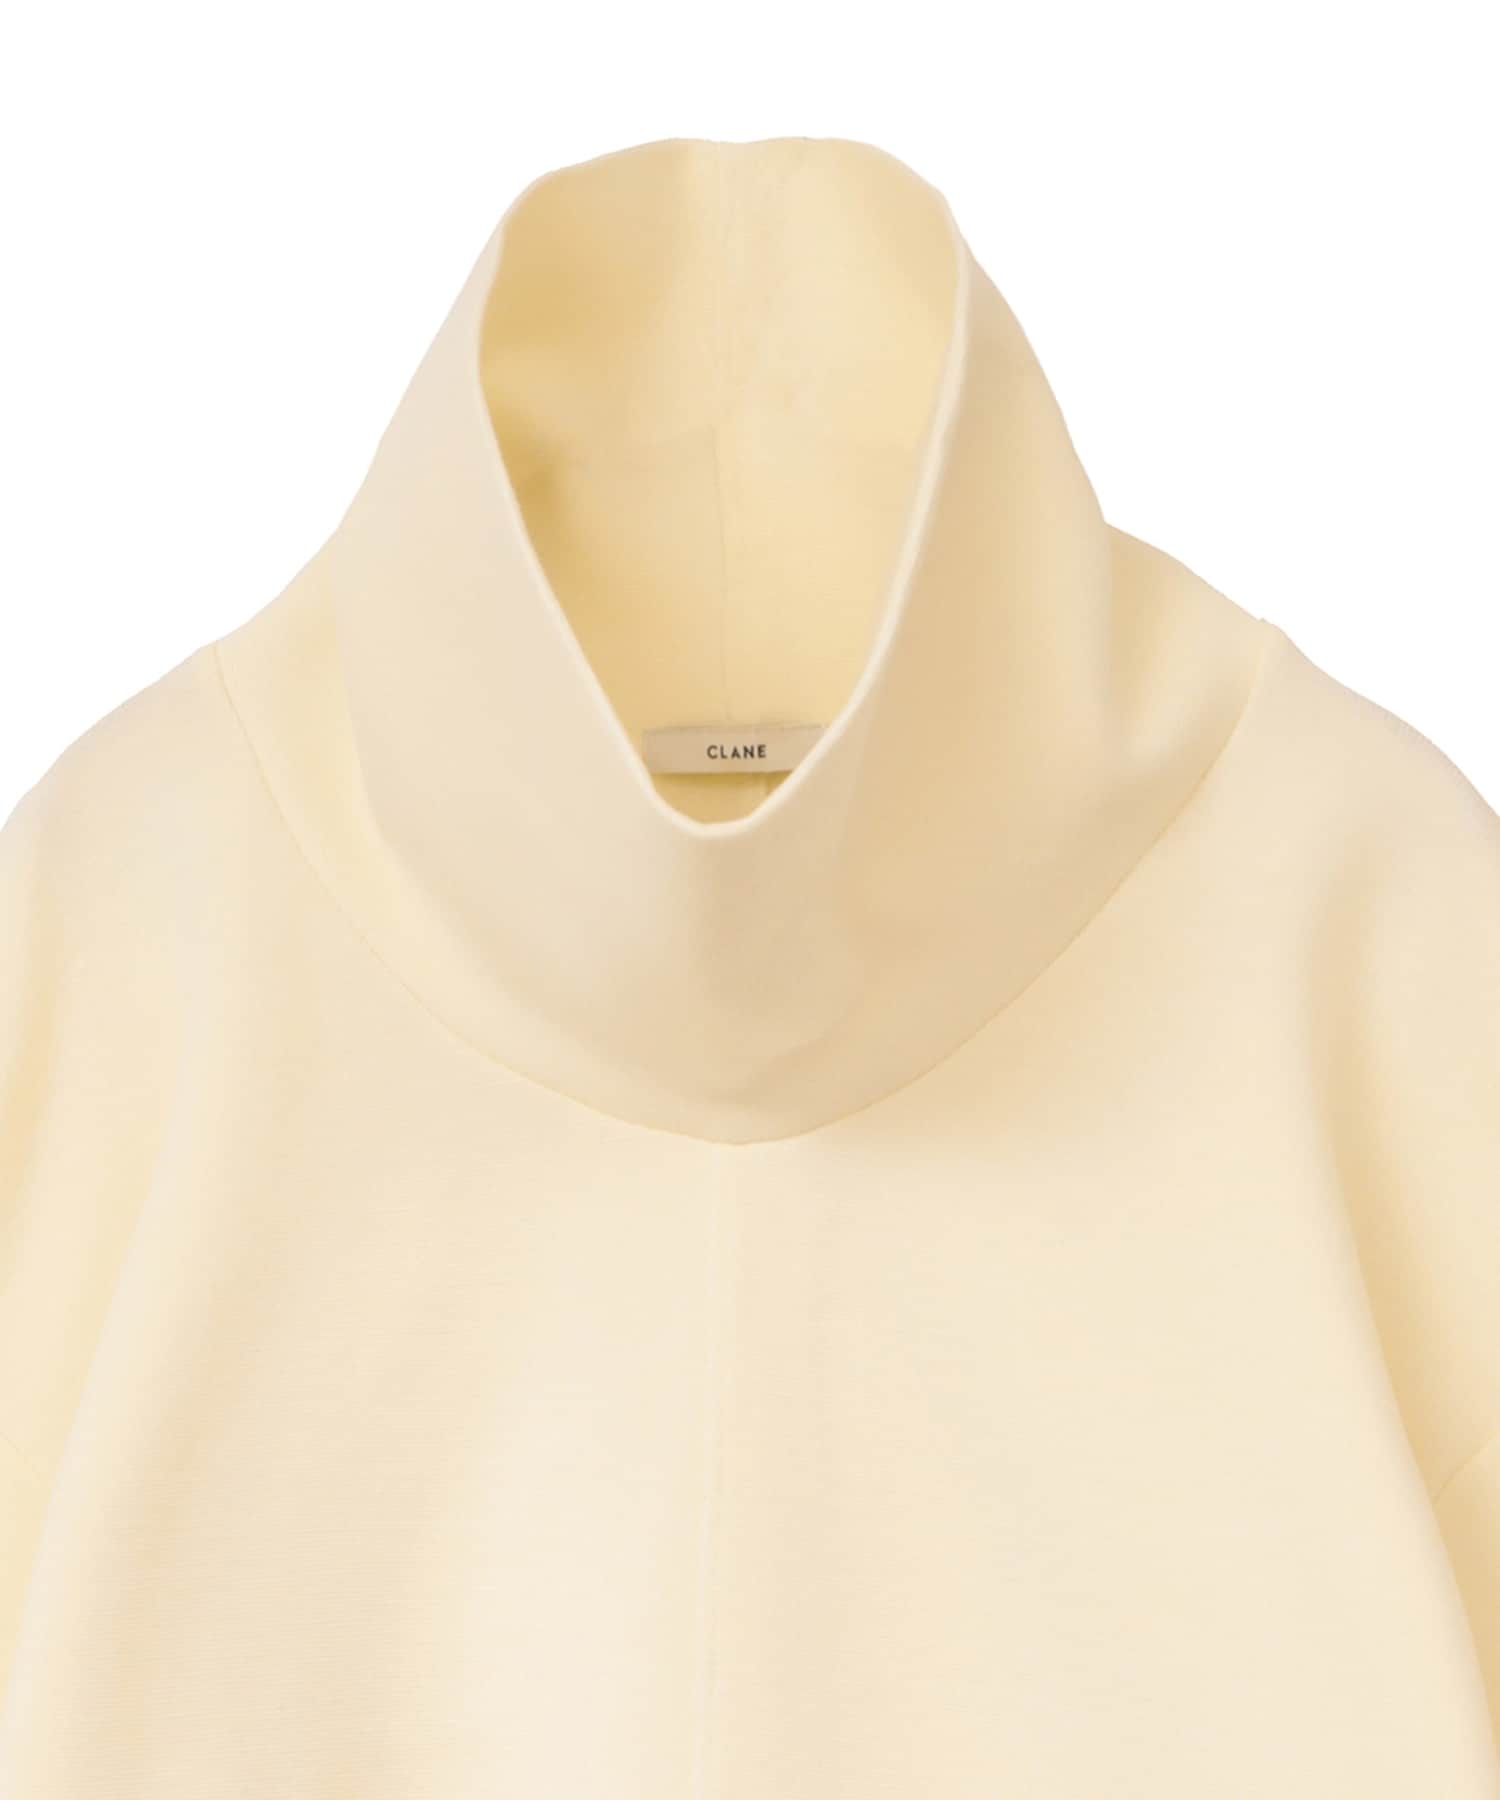 CLANE   STAND NECK WIDE TOPS22aw